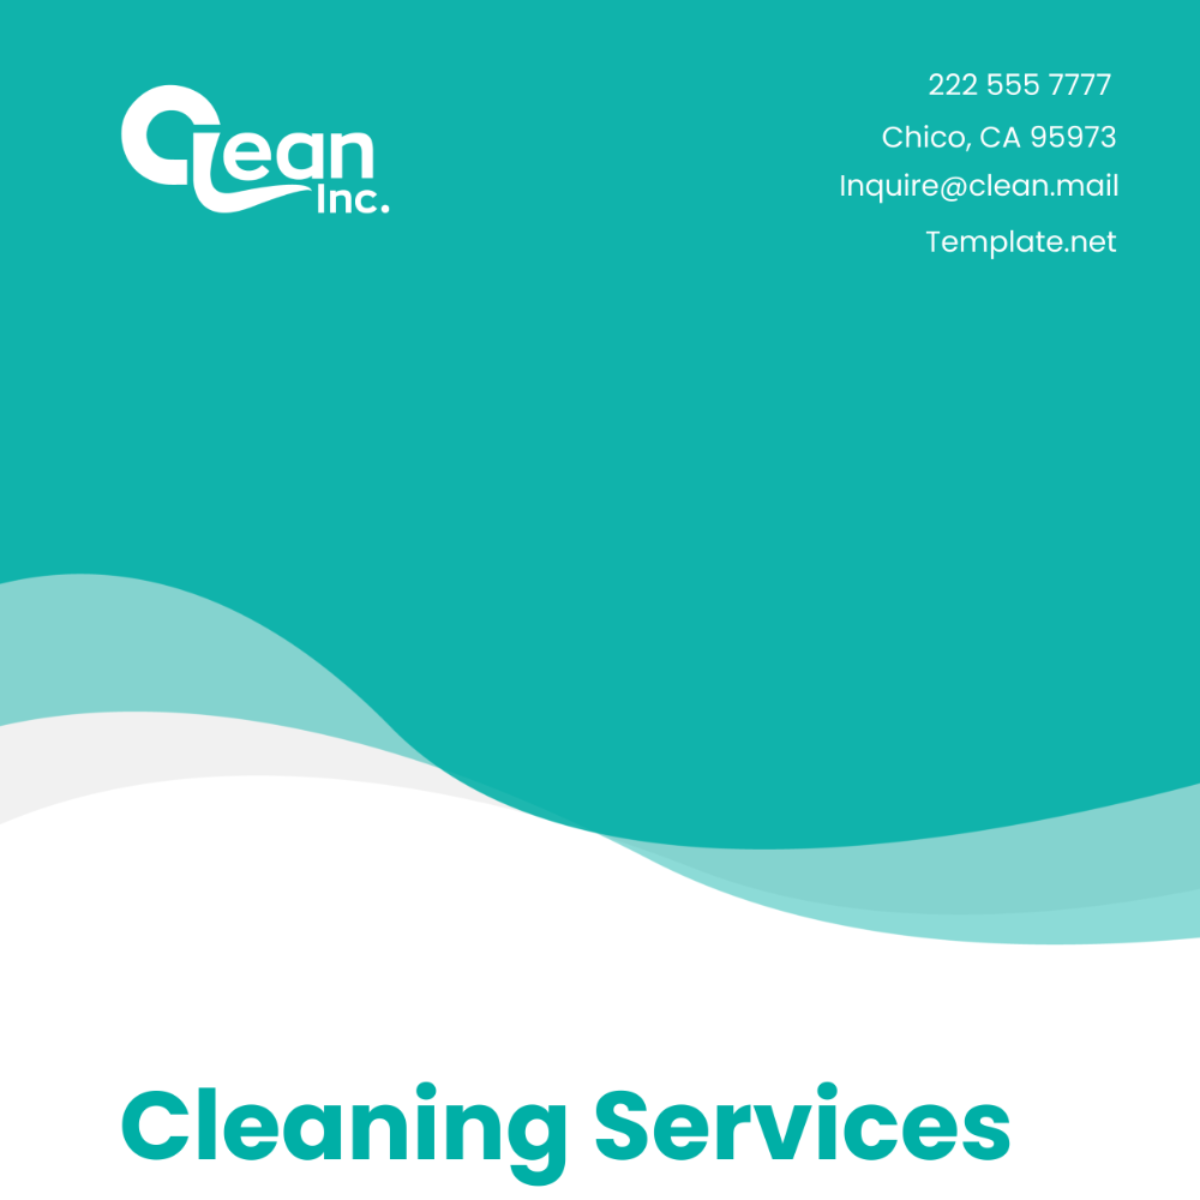 Cleaning Services Equipment Policy Template